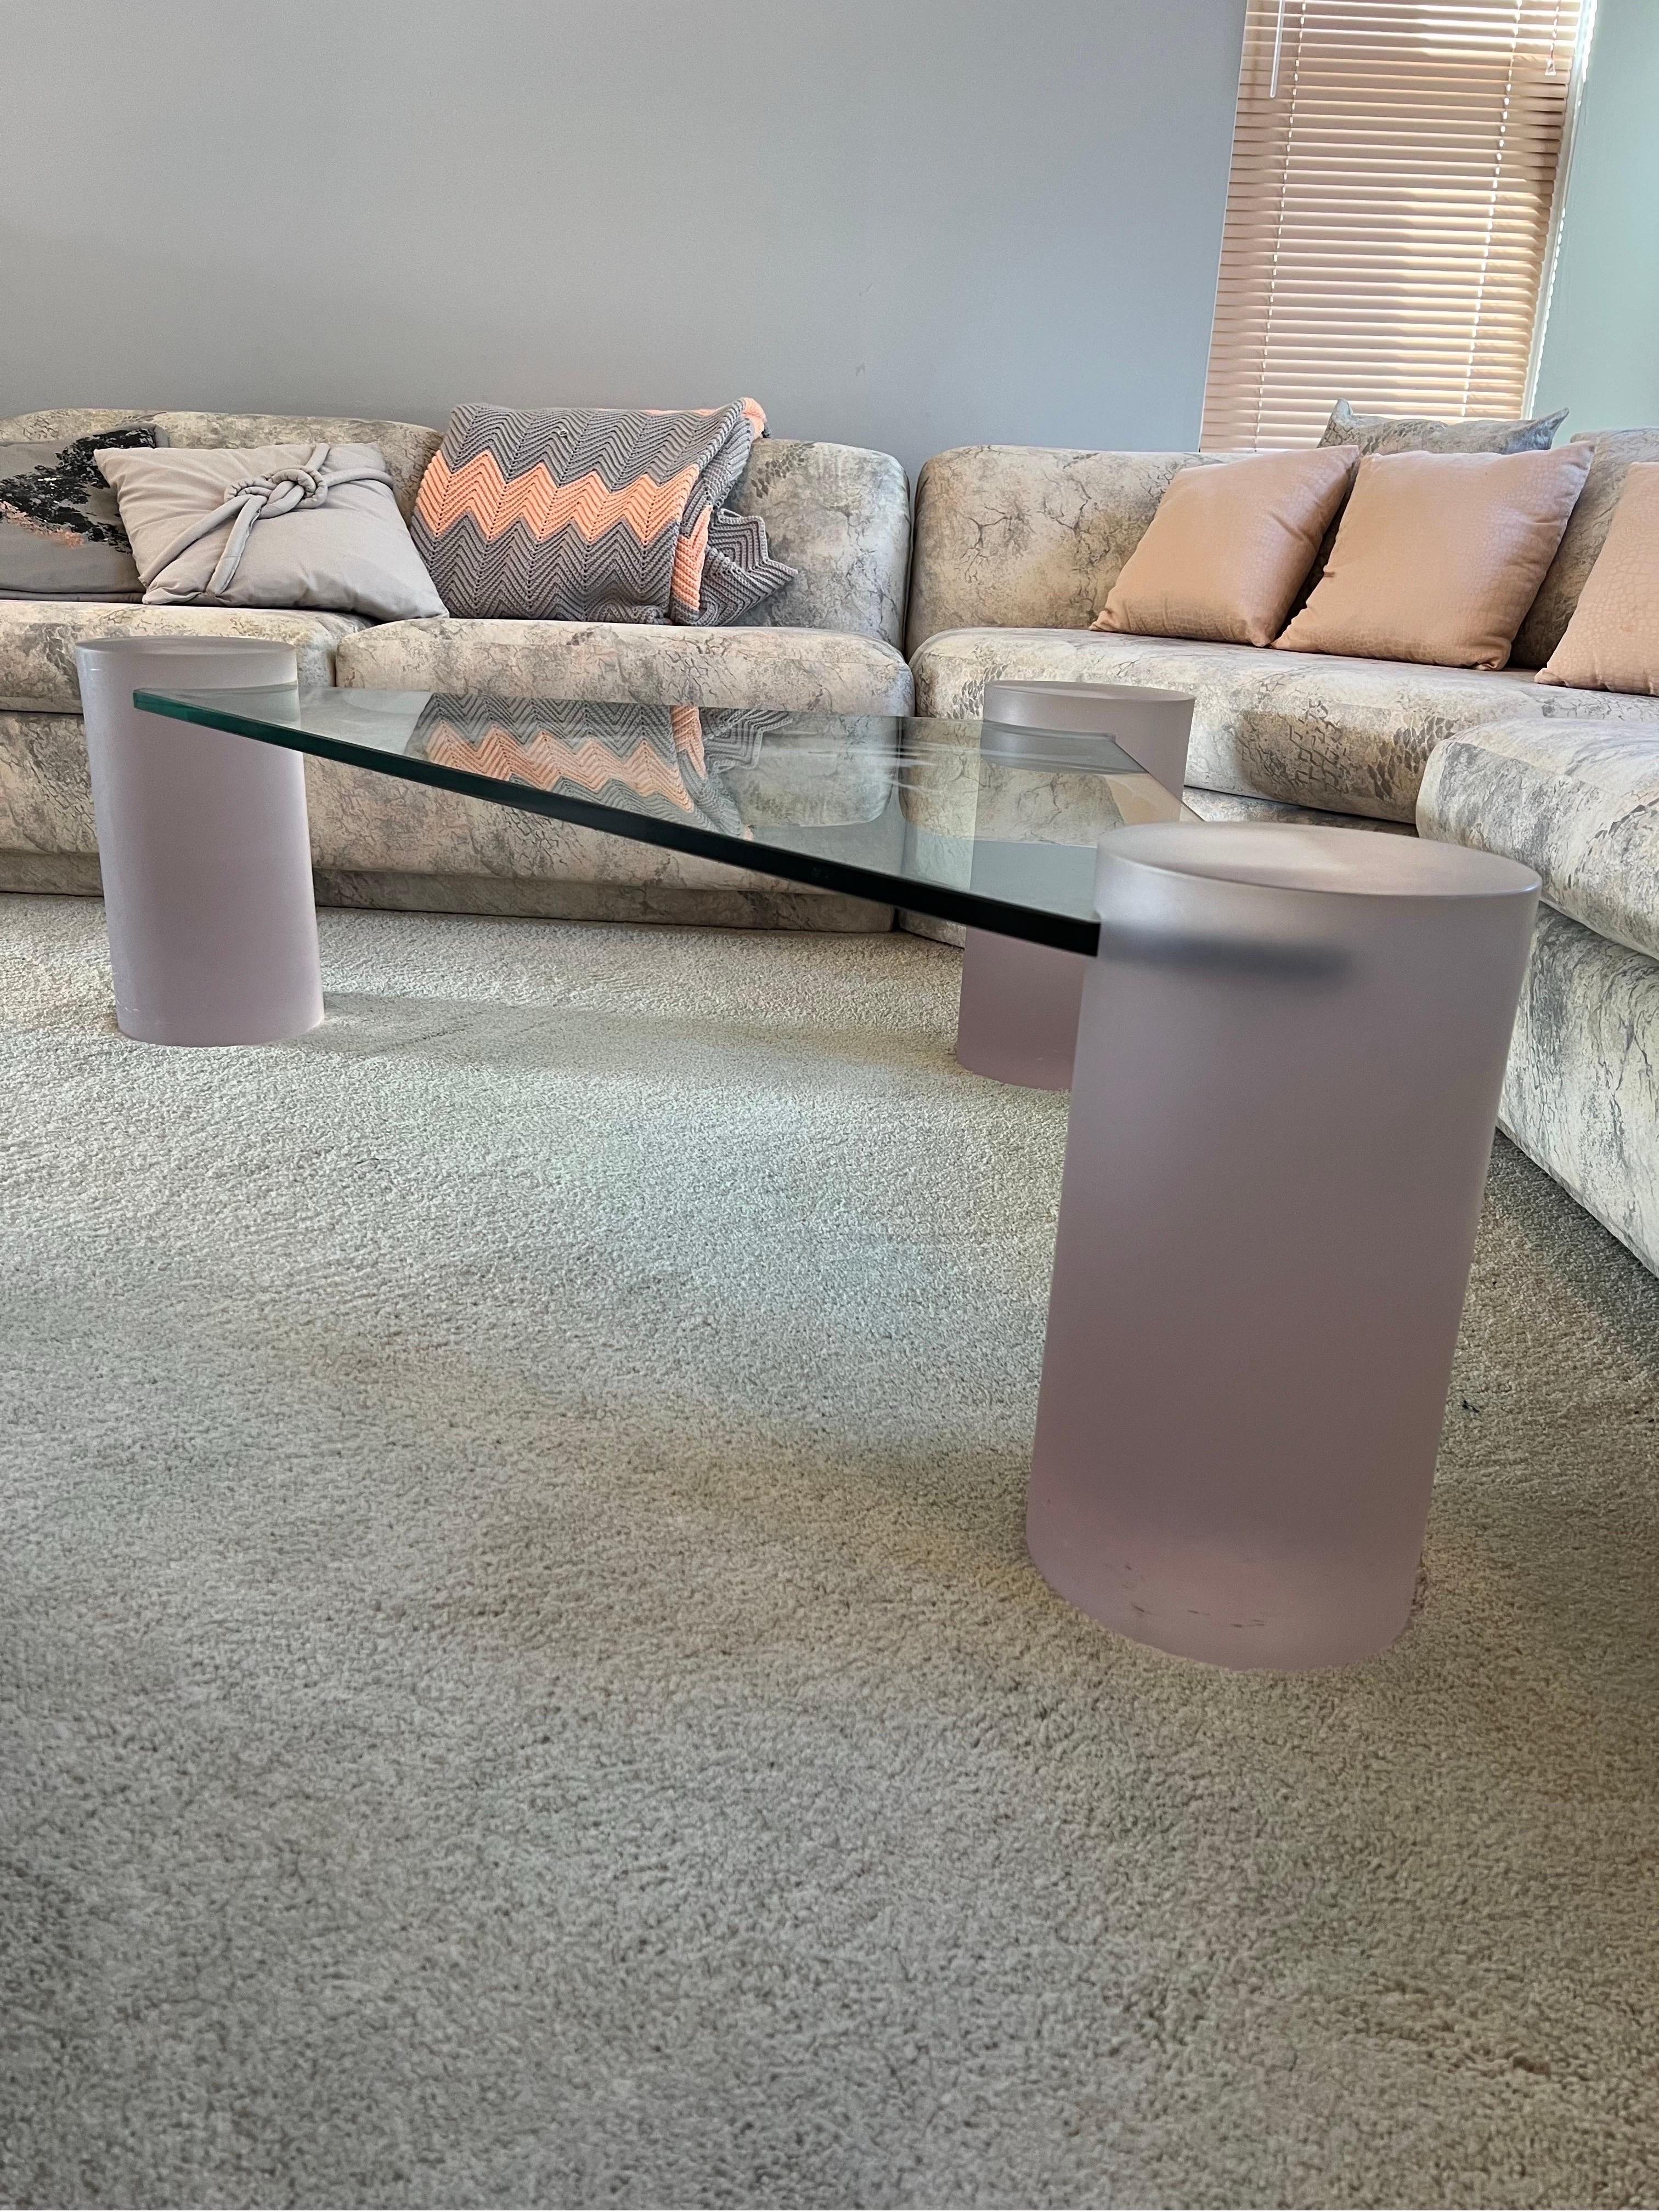 Large beautiful pink frosted glass triangle coffee table, circa 1980

Pink triangle table 47x47x16.5 H

Column Leg each 9x9

Glass
Long: 39.5
Depth: 1